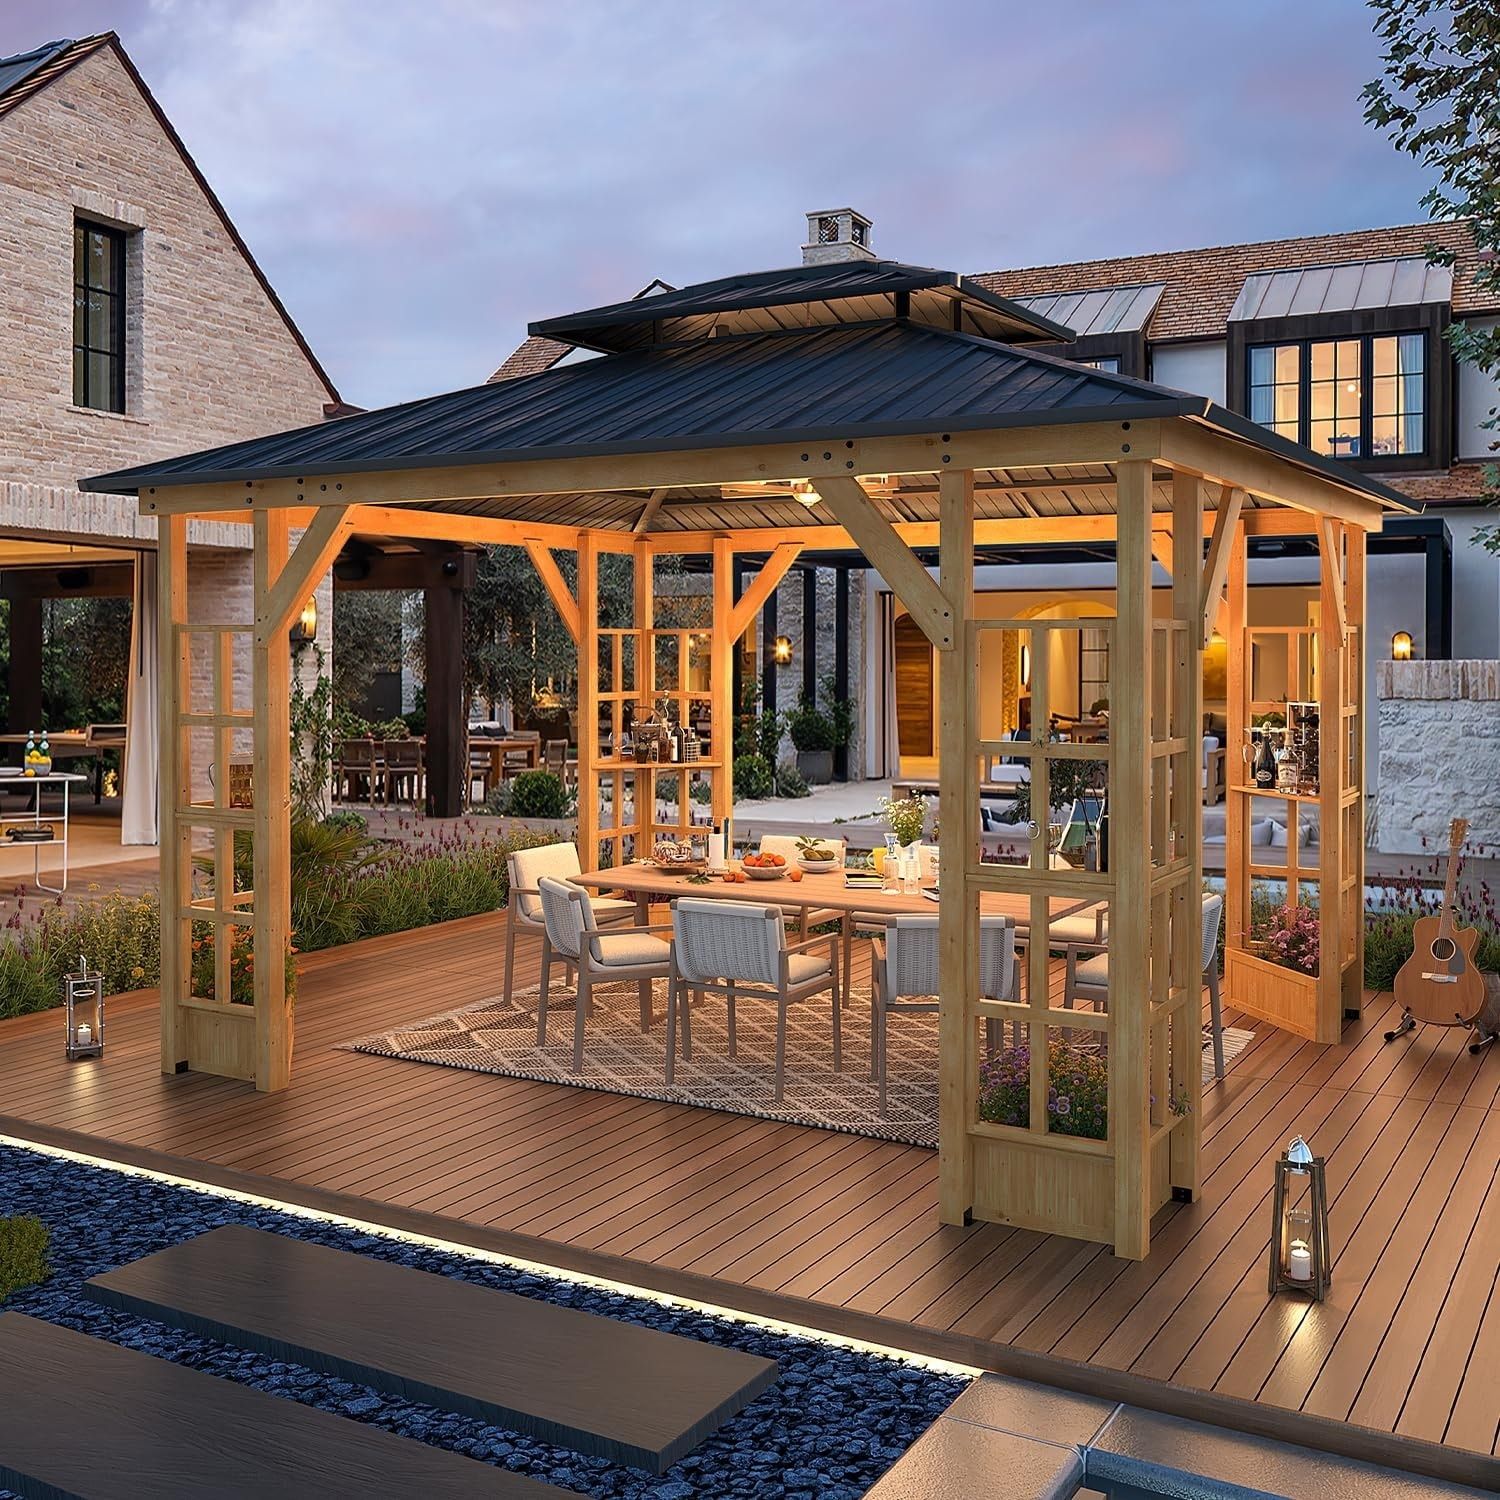 Enhance Your Outdoor Space with a Stunning Wood Gazebo Canopy